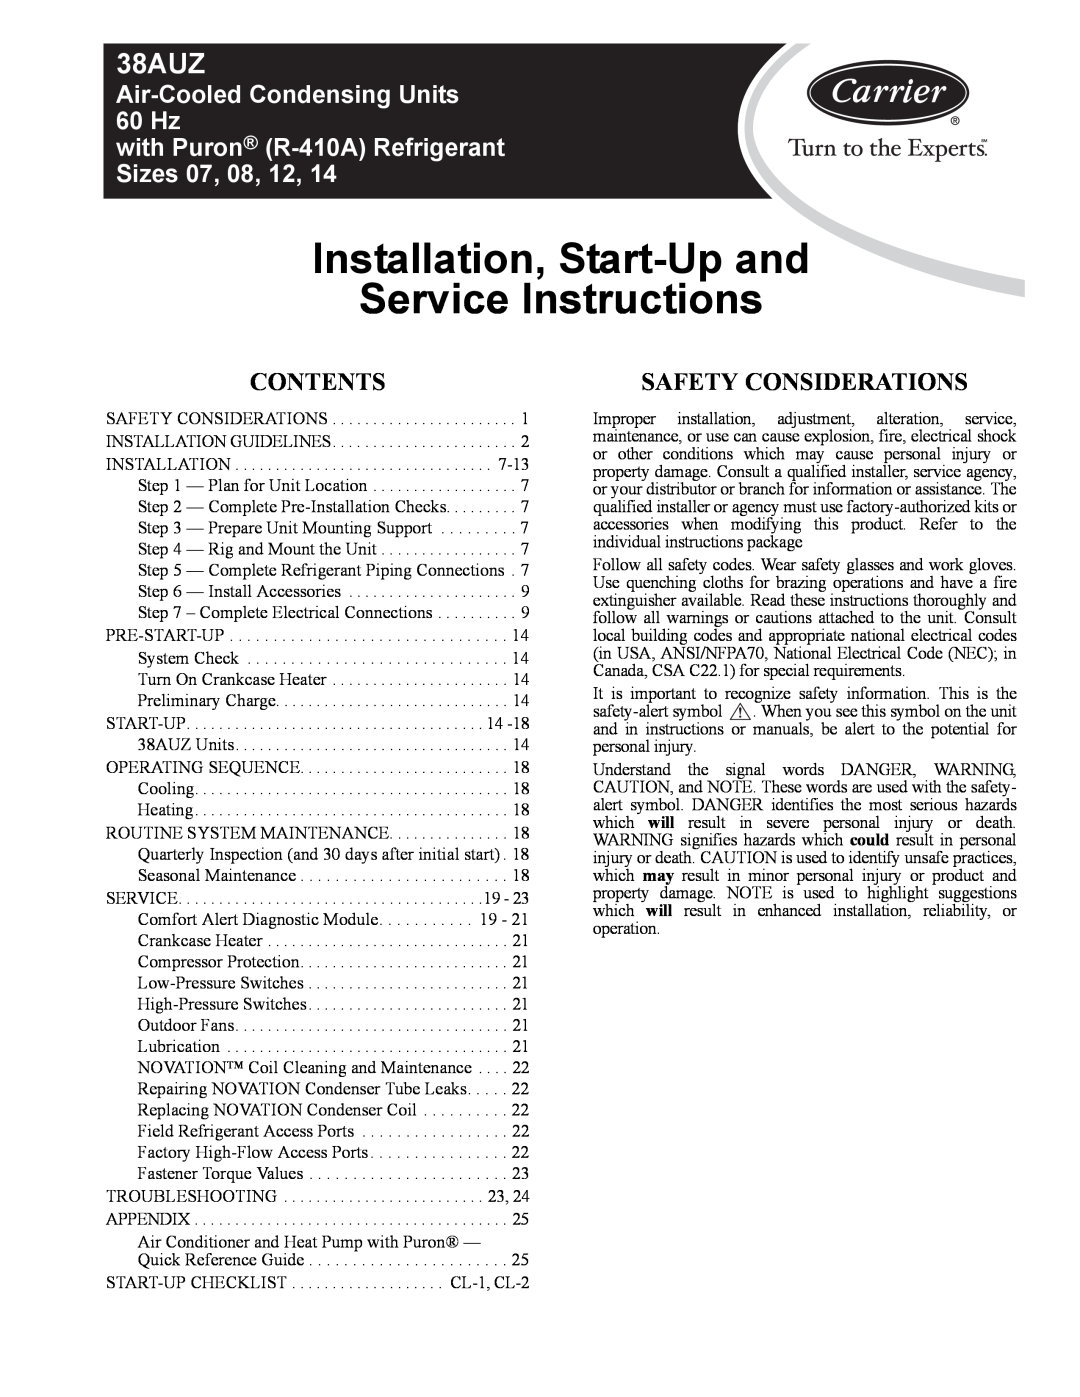 Carrier 38AUZ appendix Contents, Safety Considerations, Installation, Start-Upand Service Instructions 